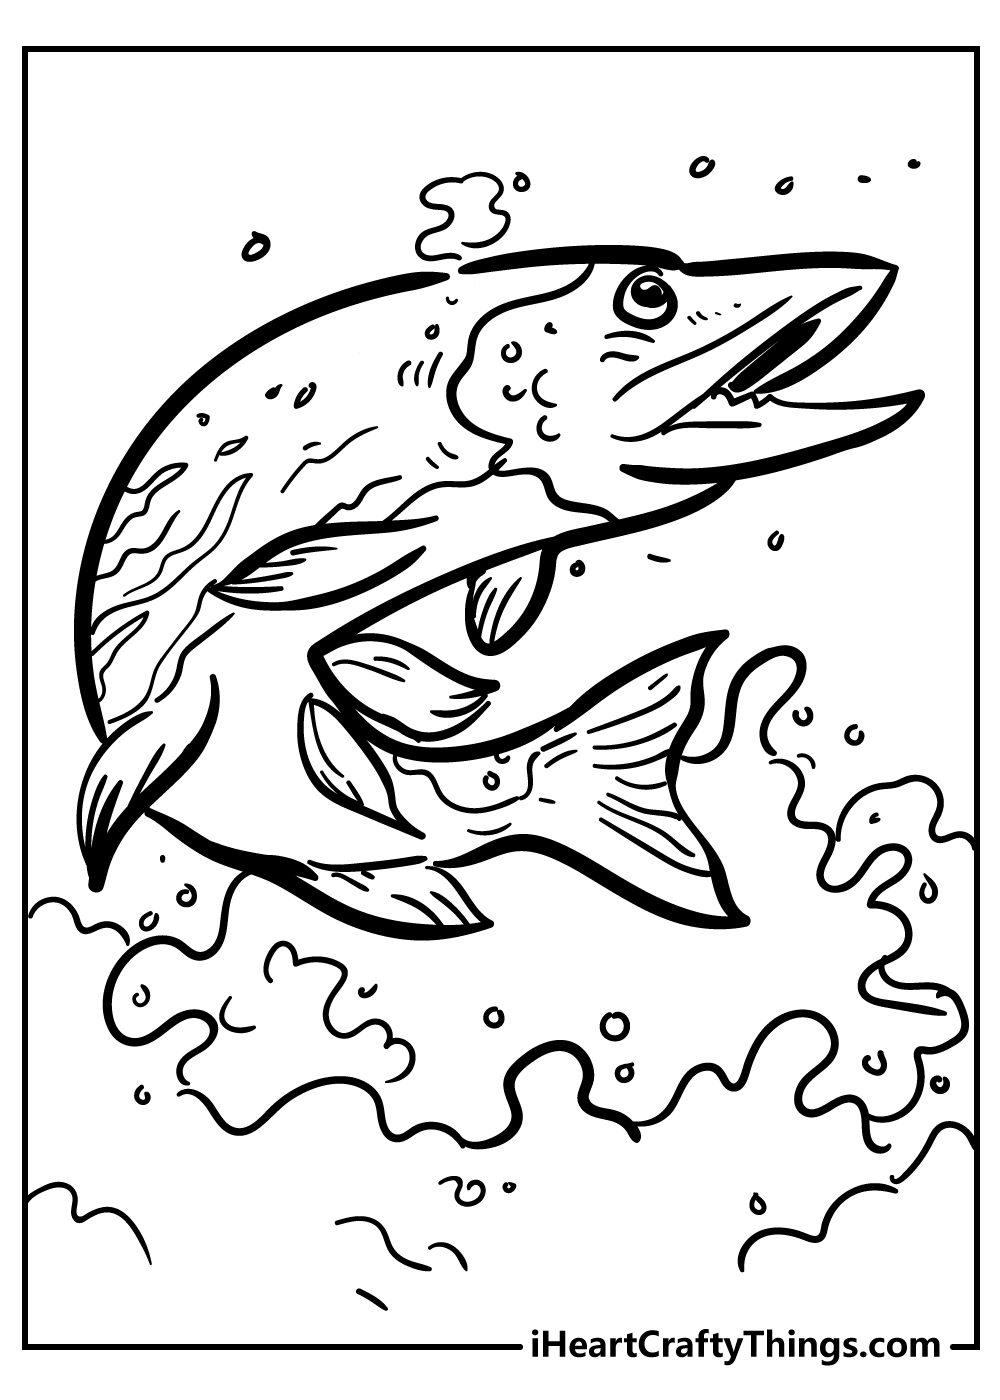 Fish Coloring Pages Updated 20